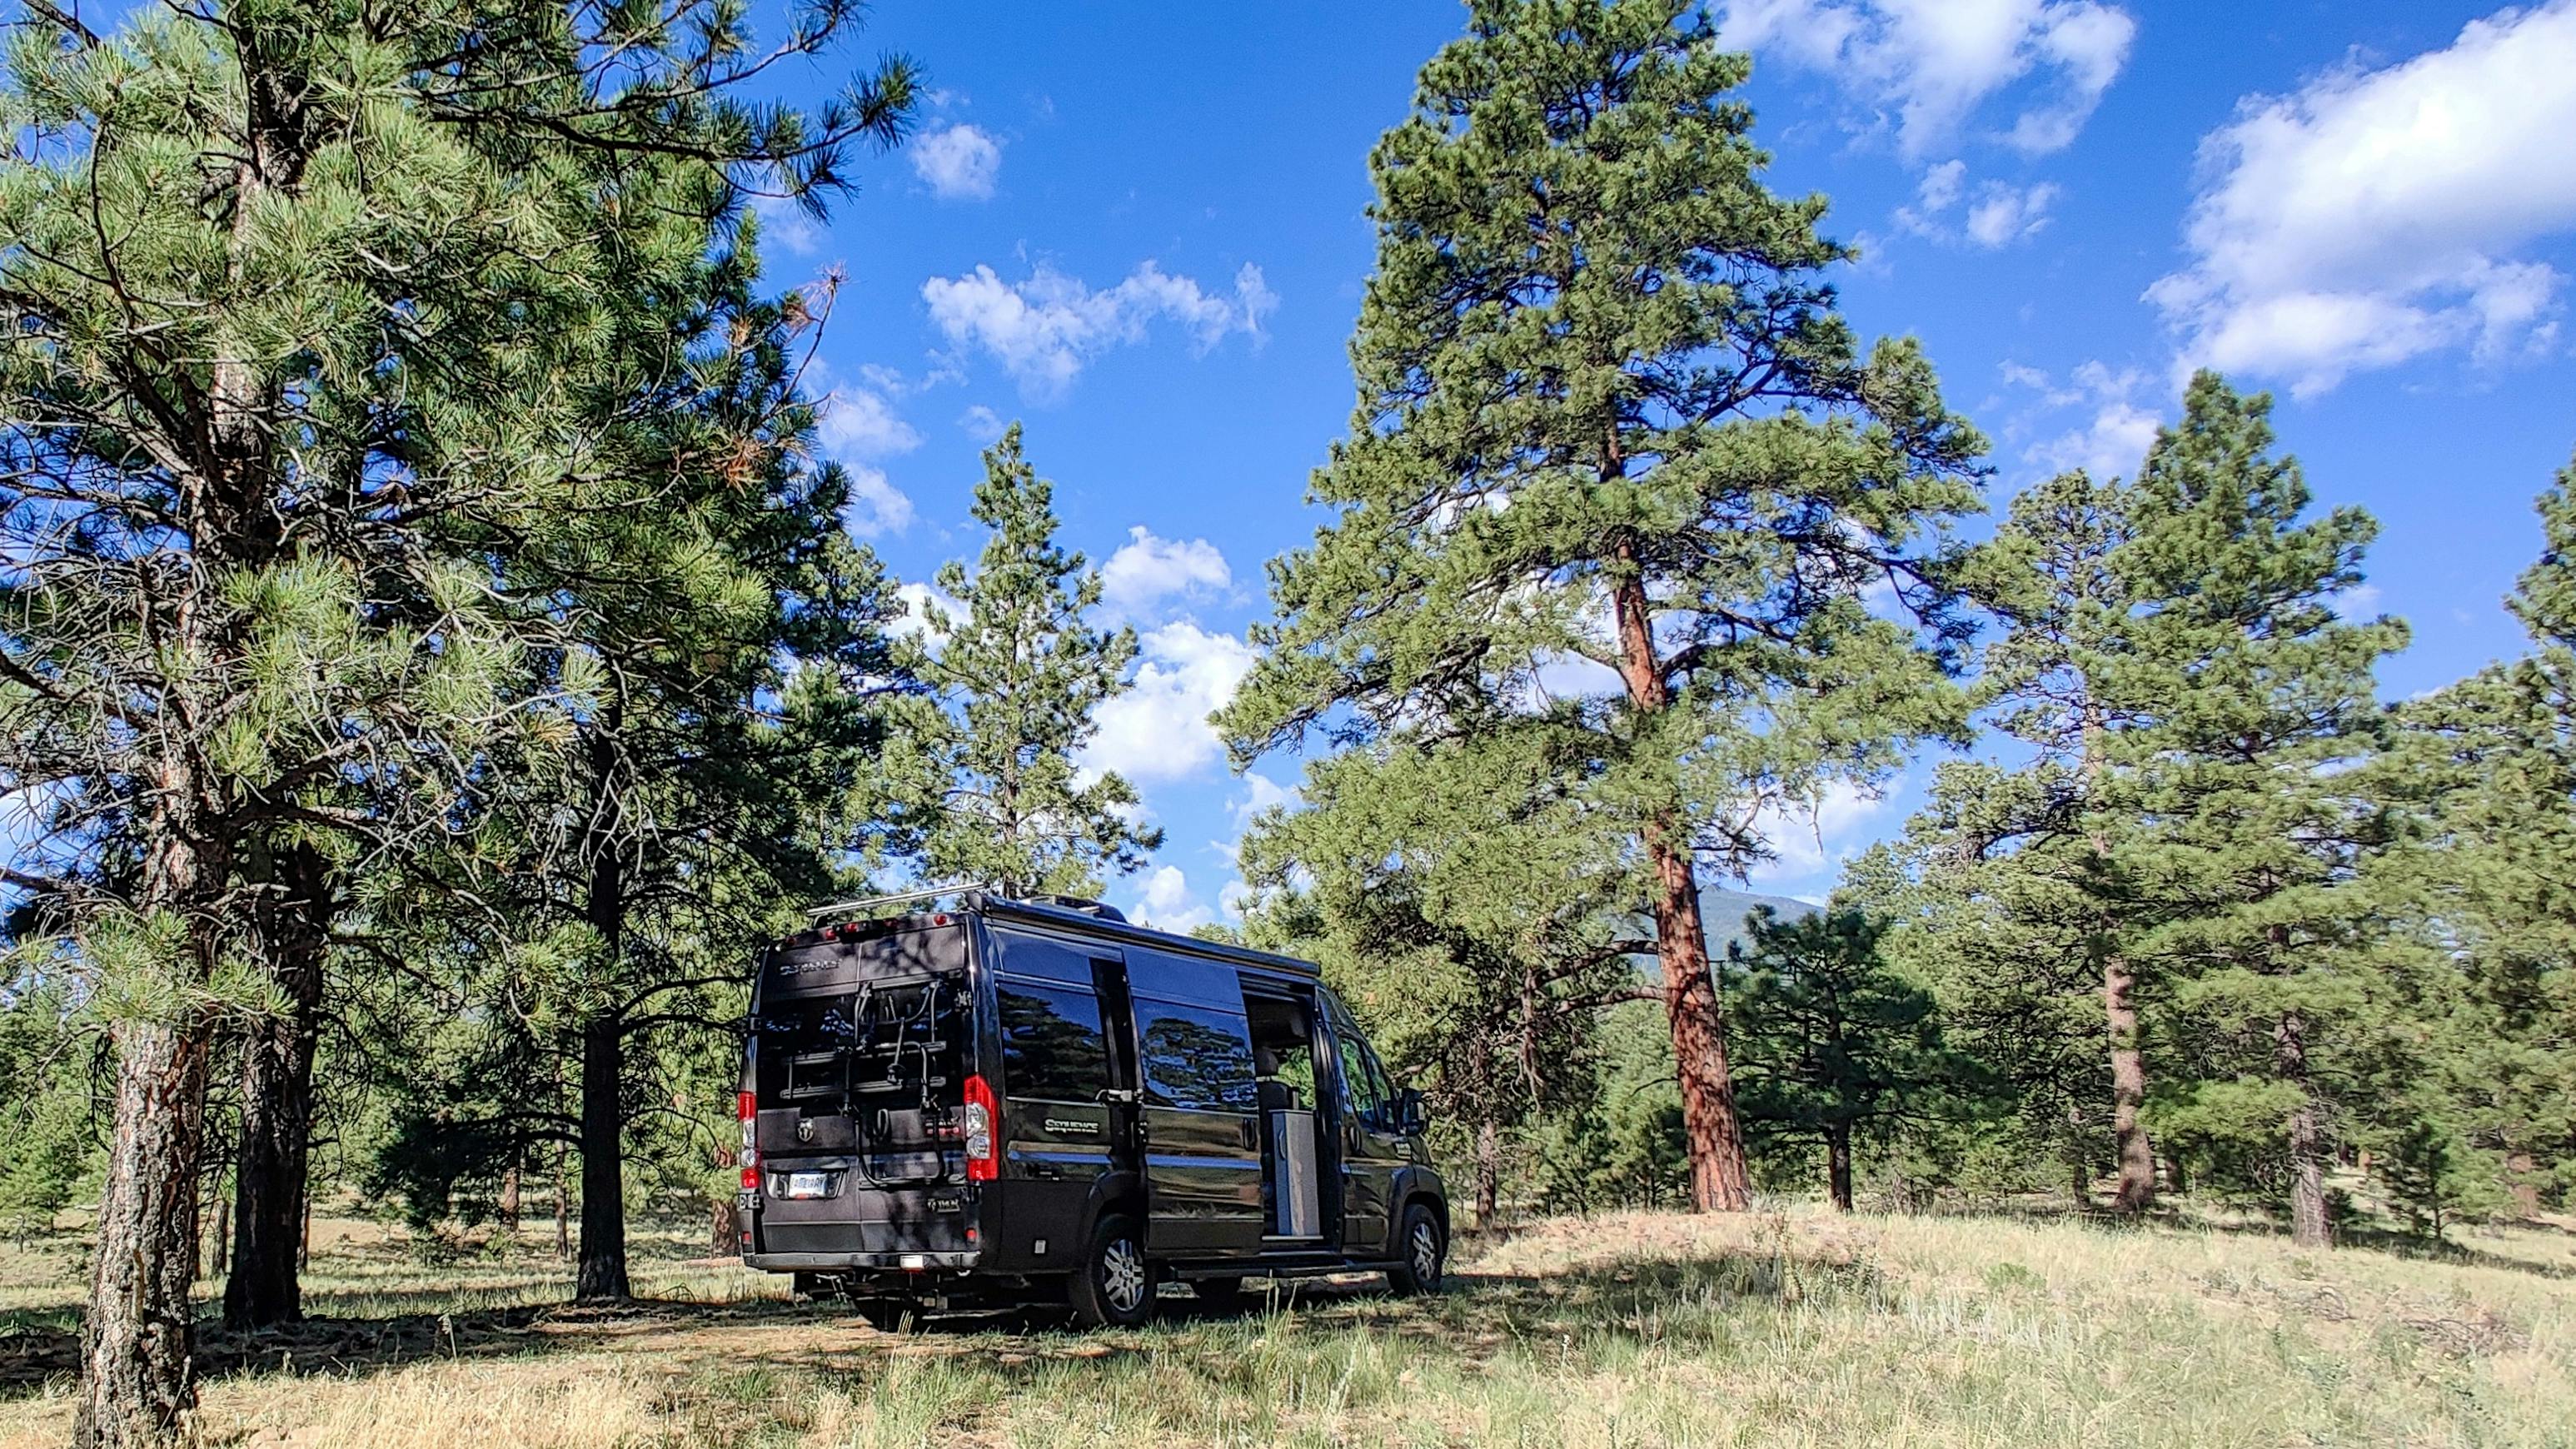 Gabe and Rocio's TMC Sequence boondocking in a National Forest